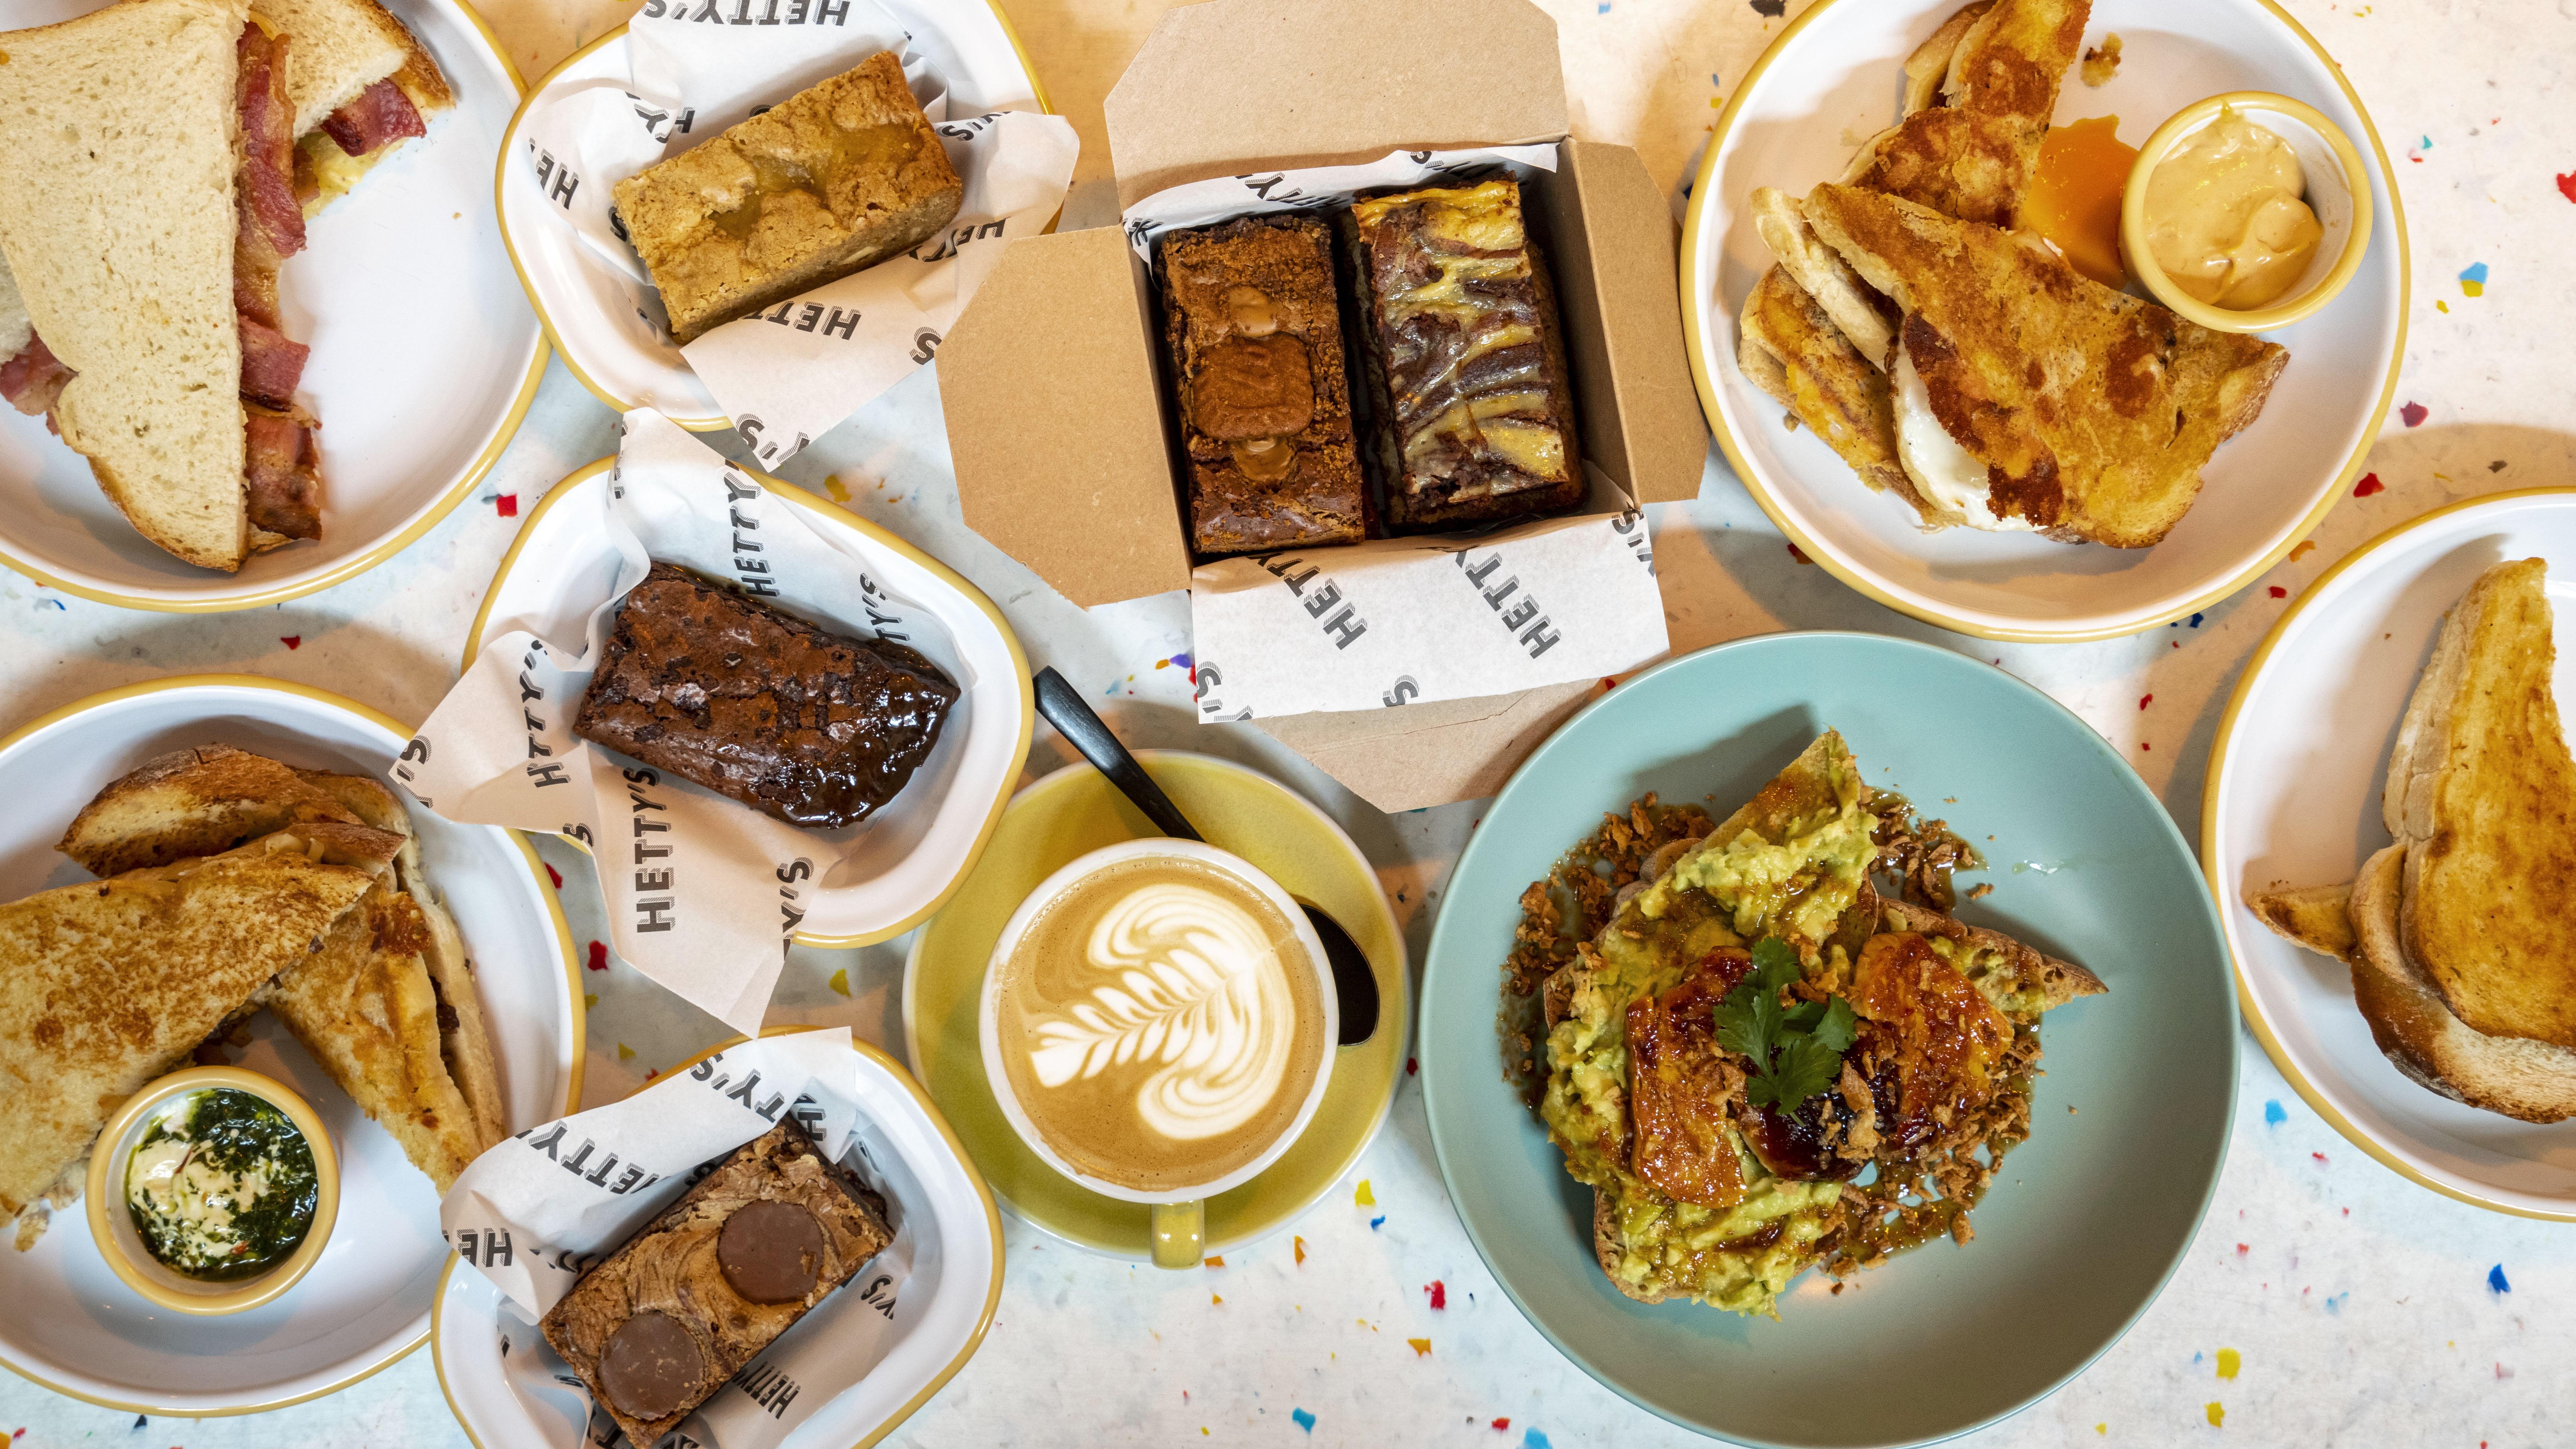 A collection of Hetty's treats from brownies to breakfast and coffees.